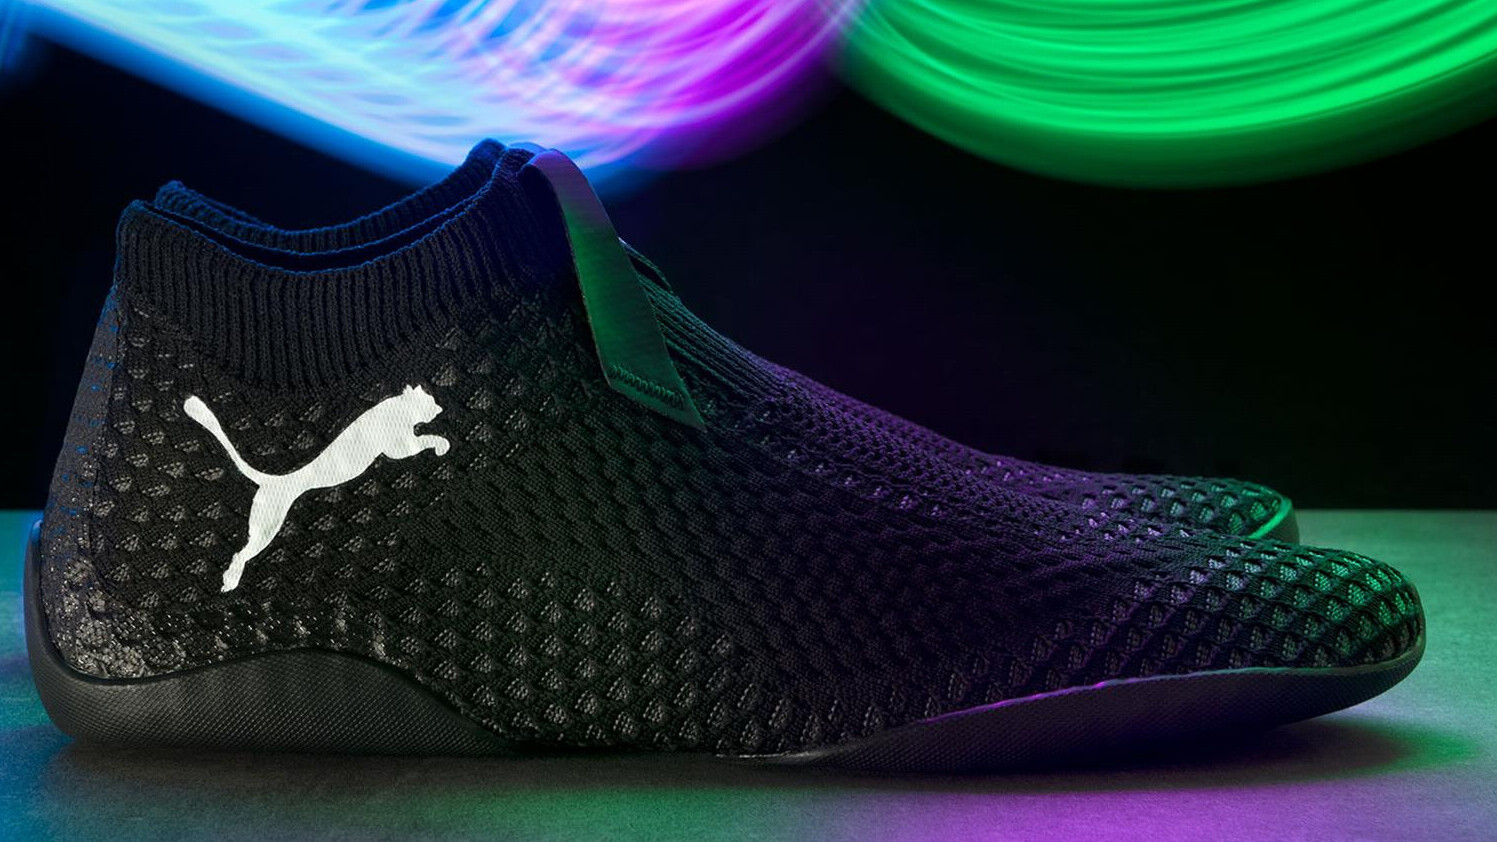 Move over Jesus, Puma just launched $160 shoes for gamers